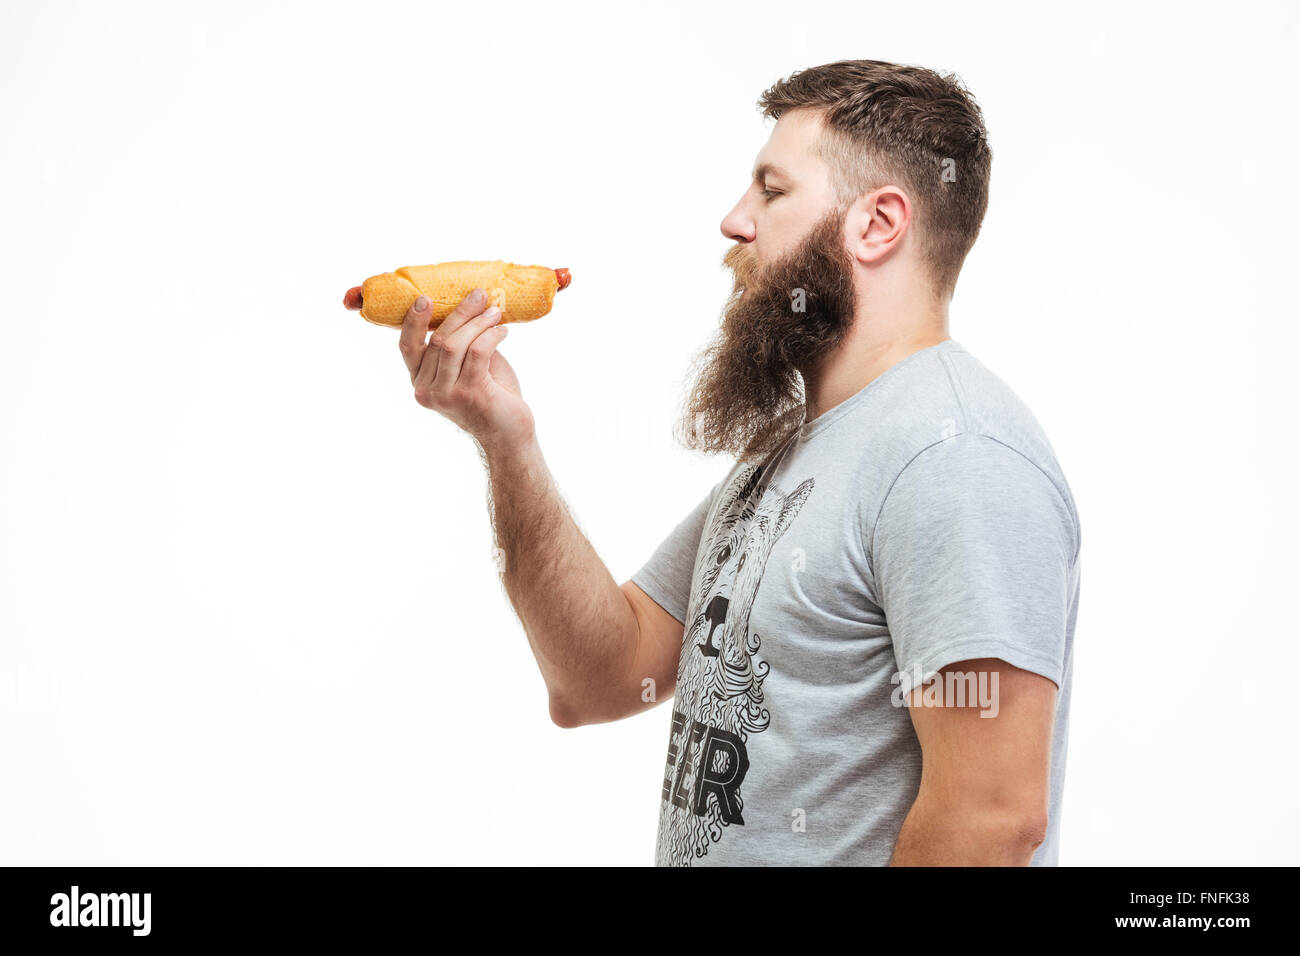 Profile of attractive bearded man standing and holding hot dog over white background Stock Photo